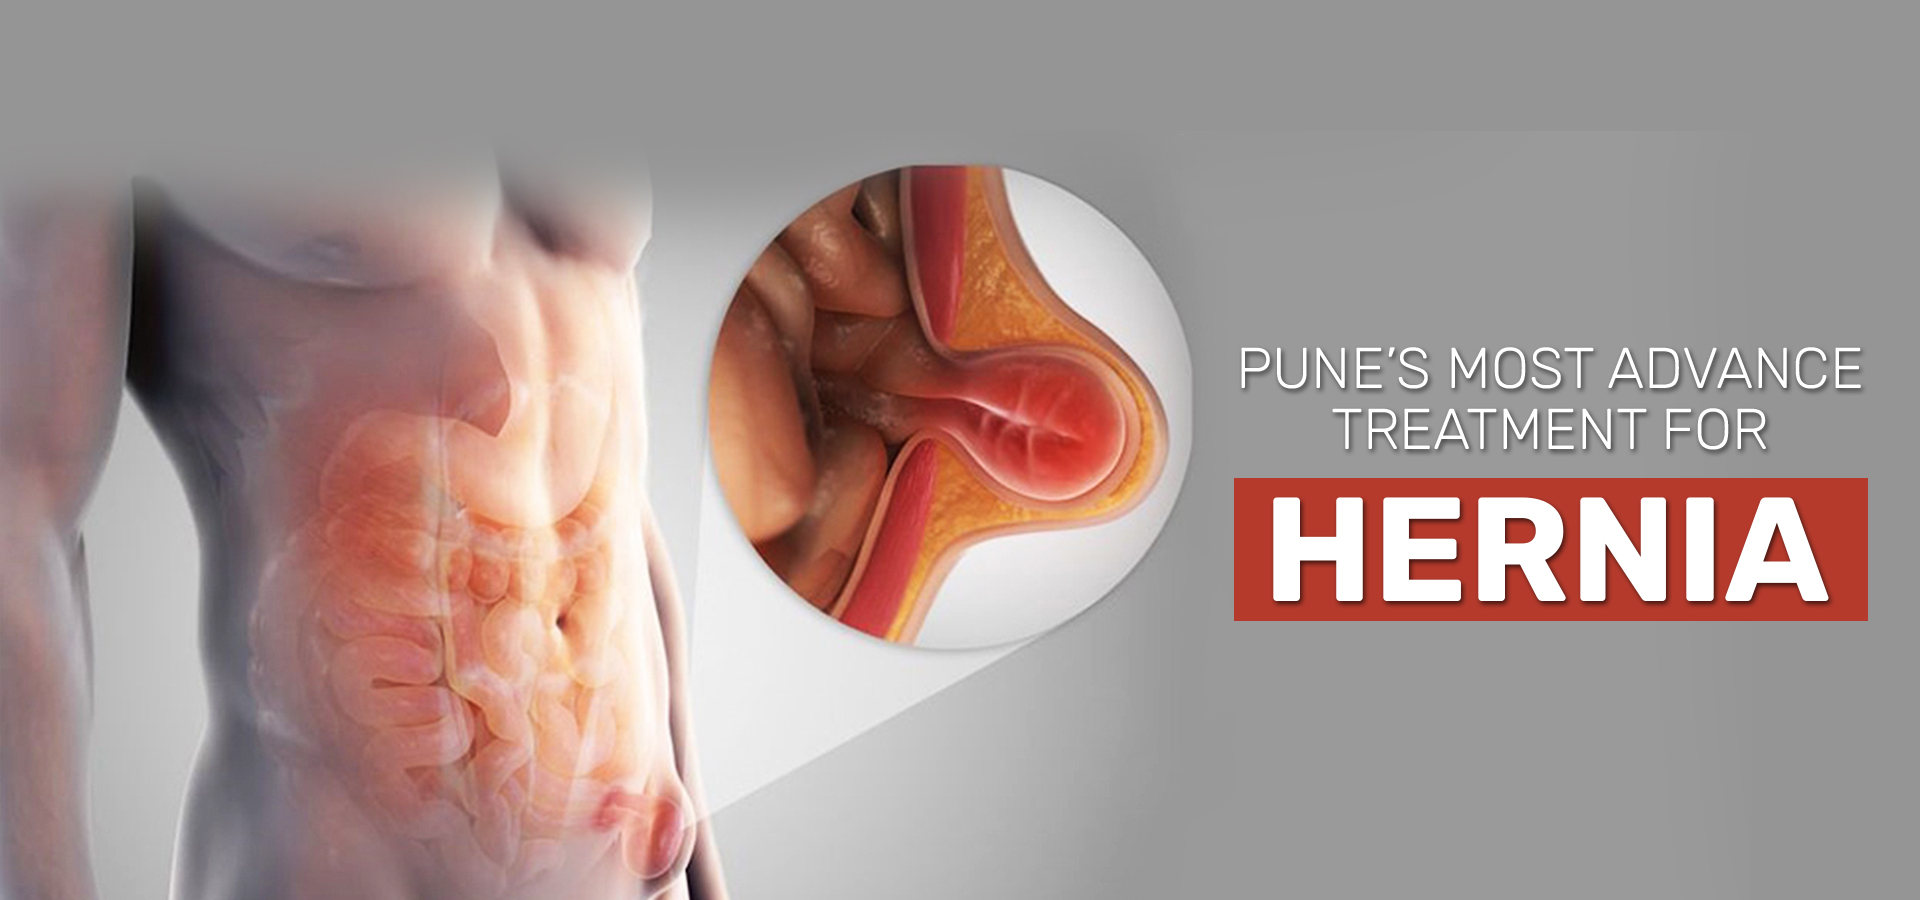 pune is the most advance treatment for hernia